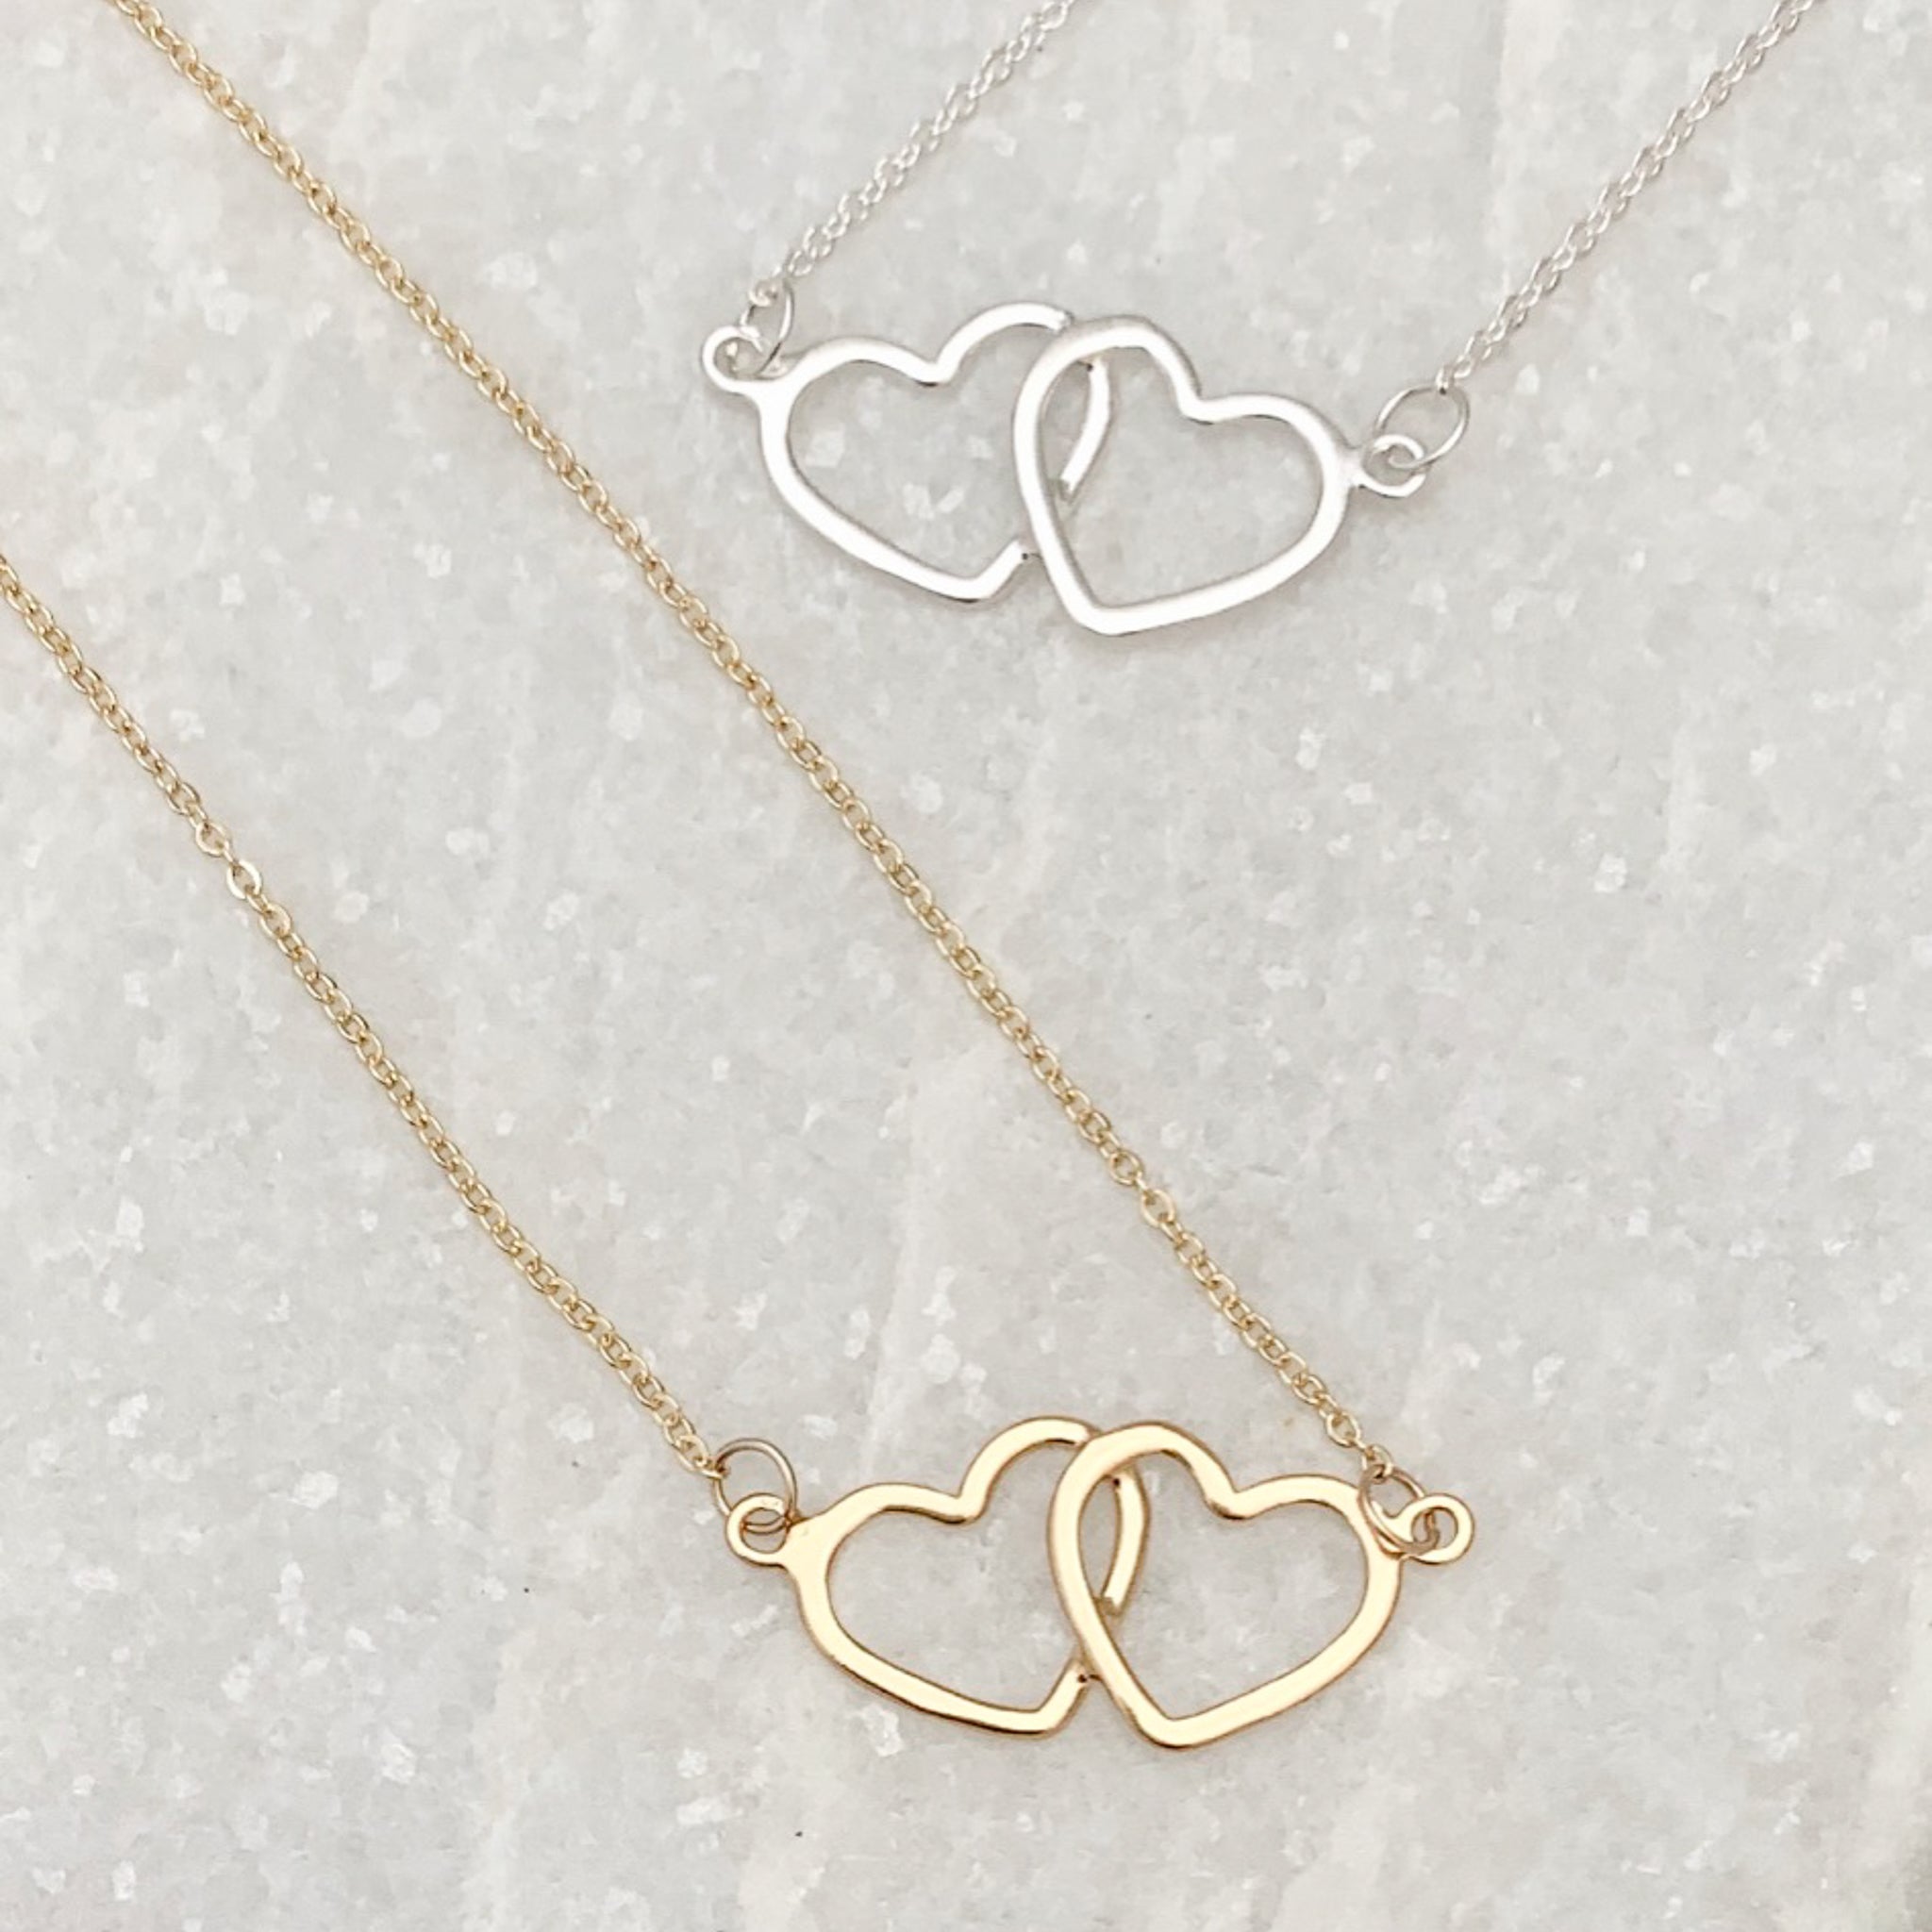 Gold and Silver Friendship Necklaces, product image